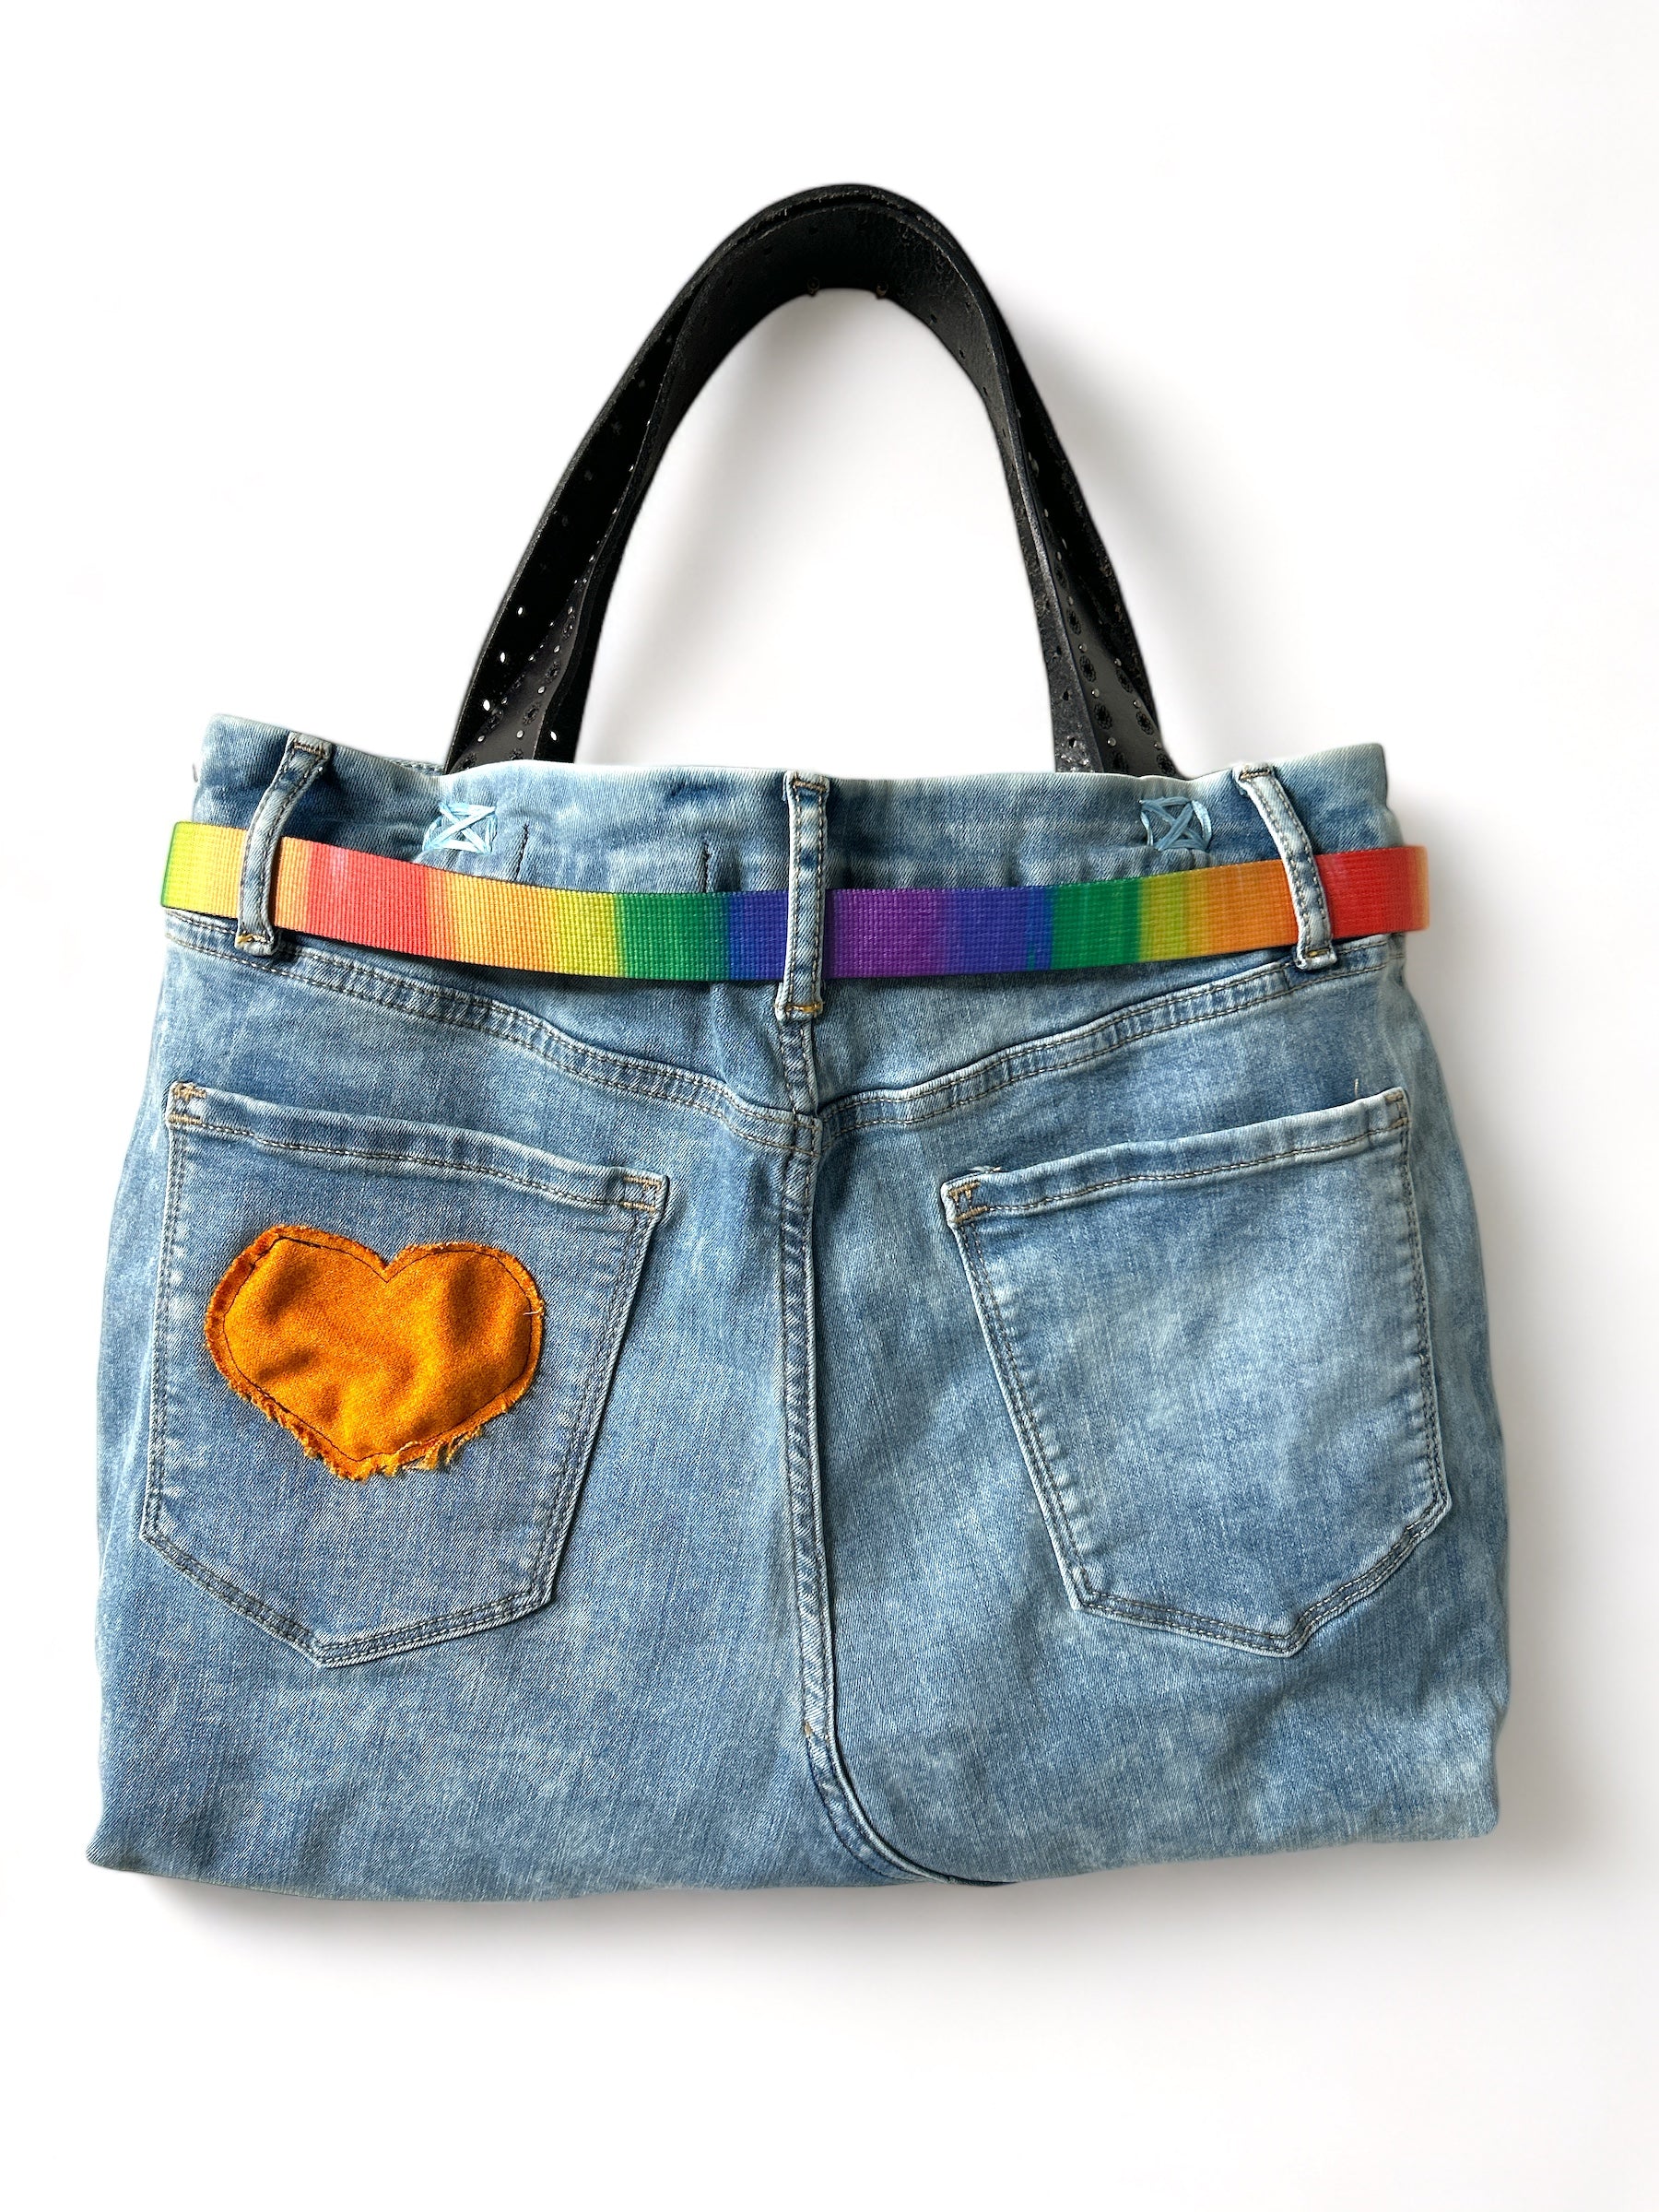 Tote Bag-CML TOTE - "XOXO"-WOOLTRIBE